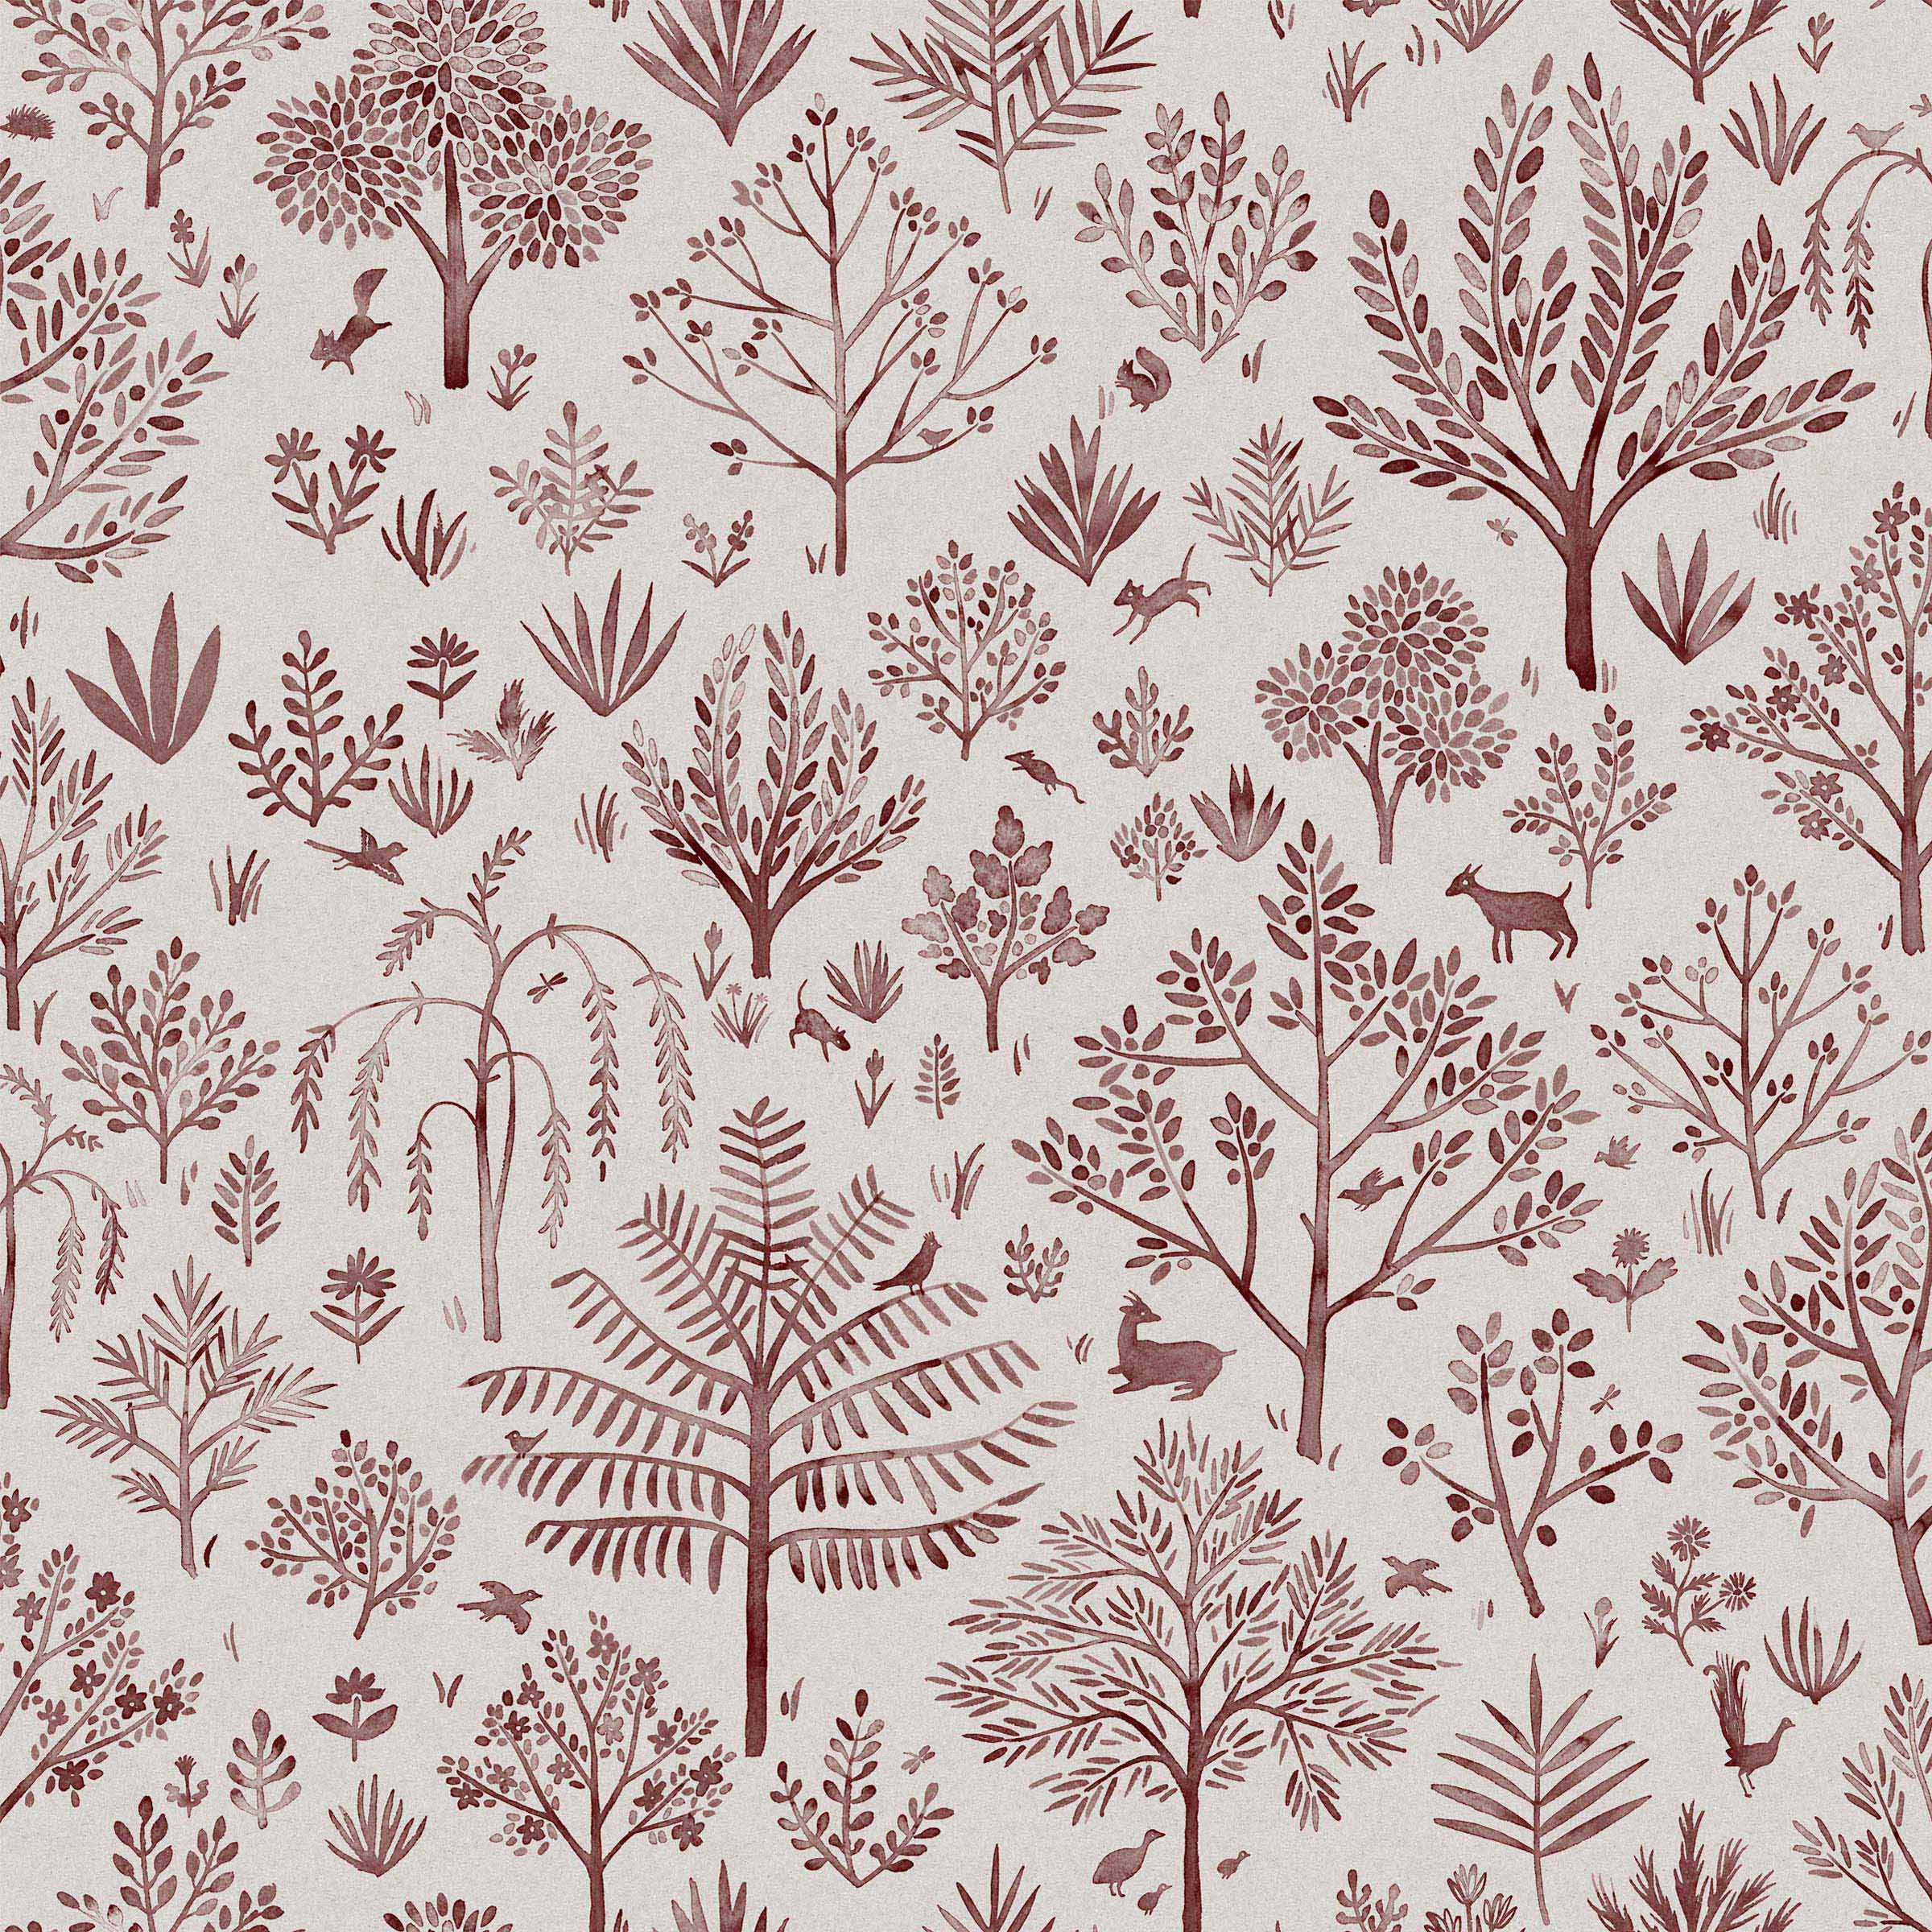 Detail of fabric in a playful animal and tree print in purple on a greige field.